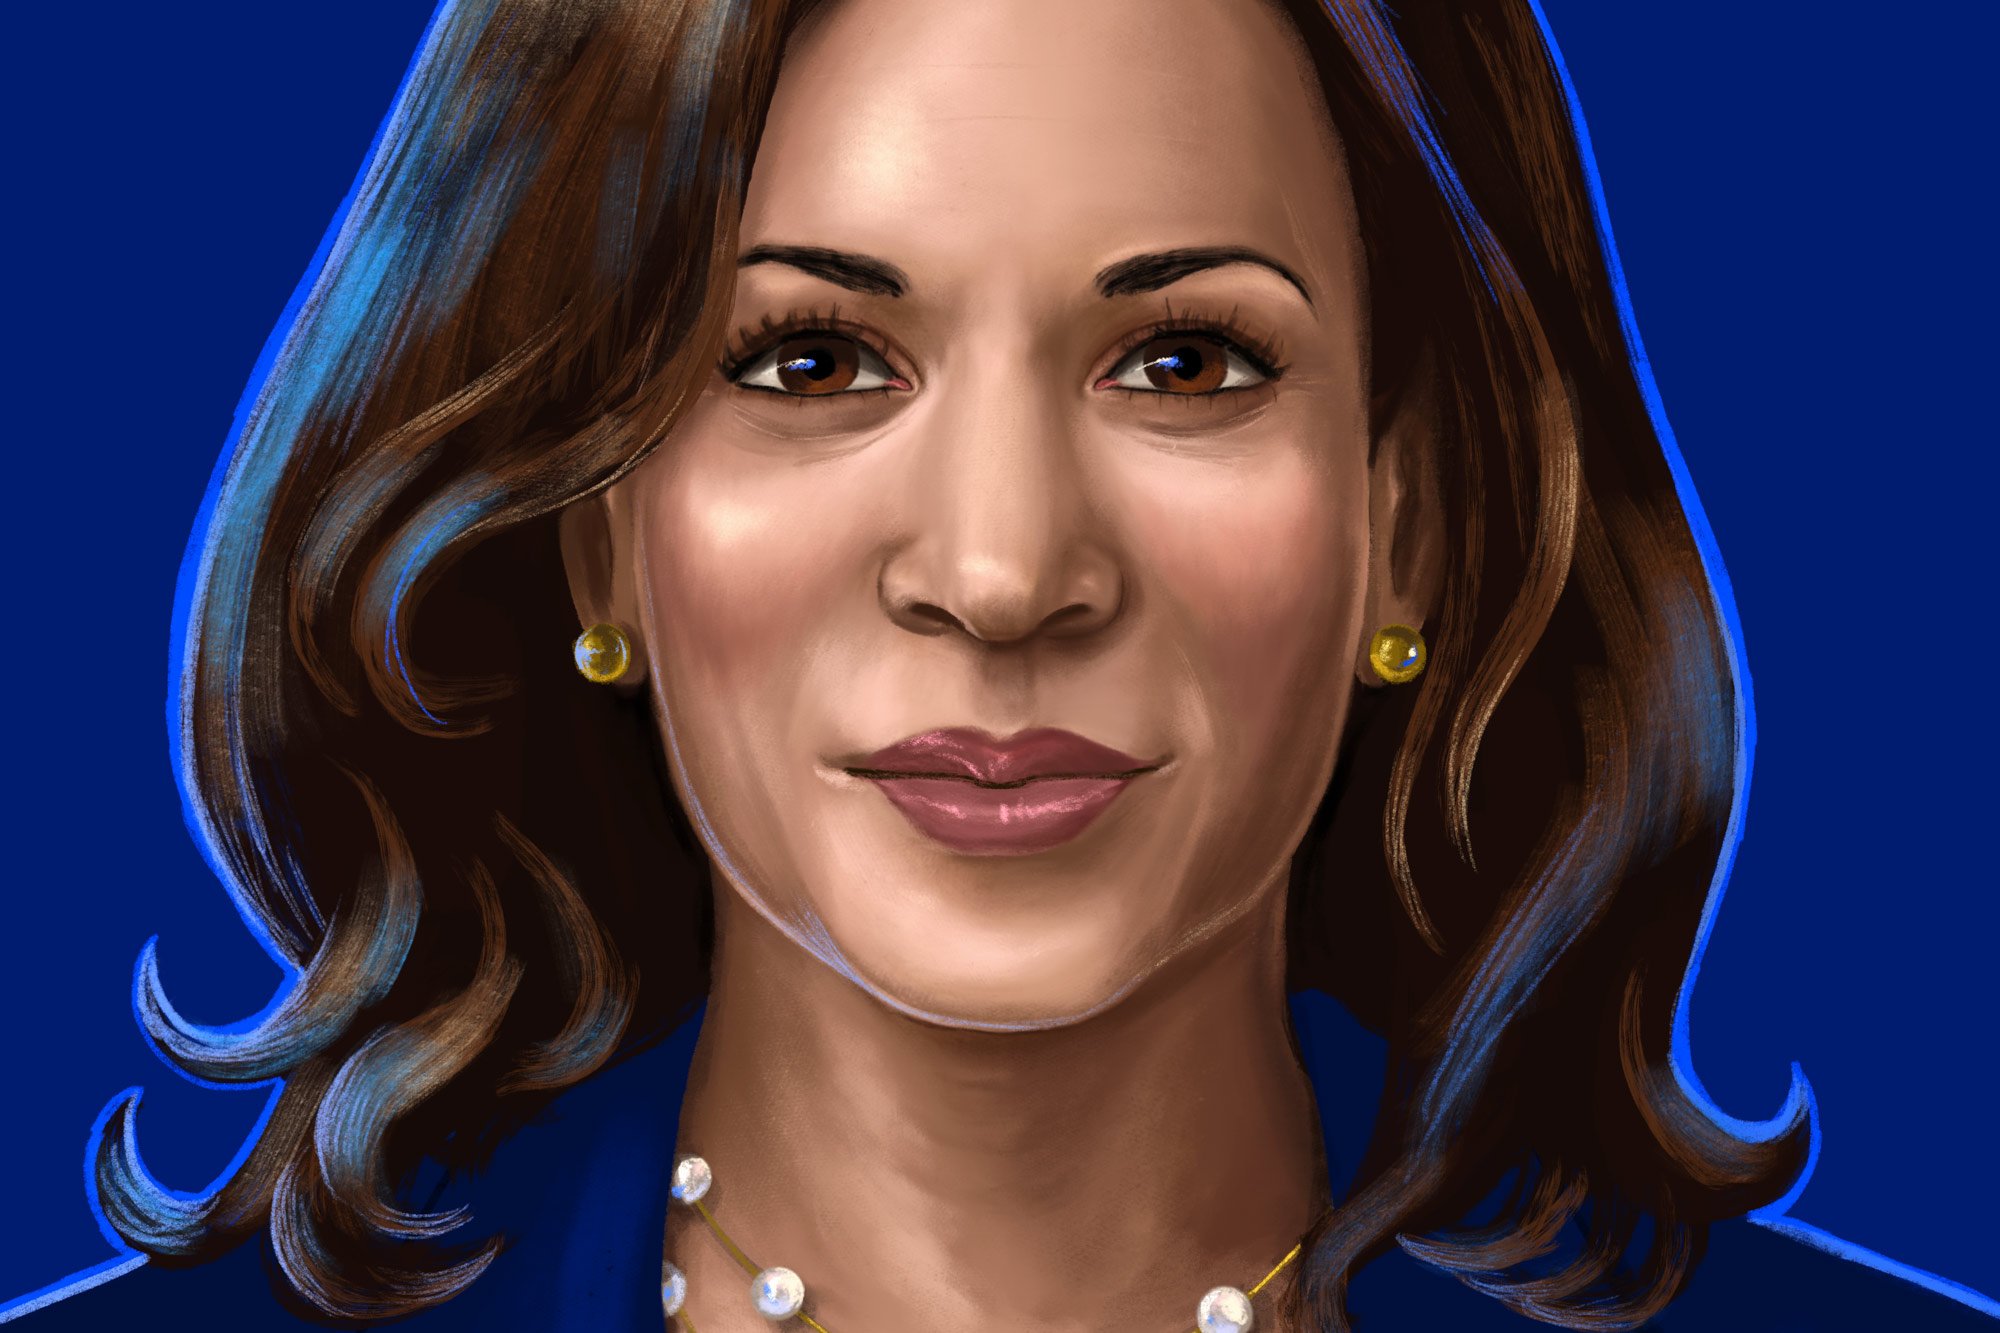 Here’s What Kamala Harris Faces as a ‘First’